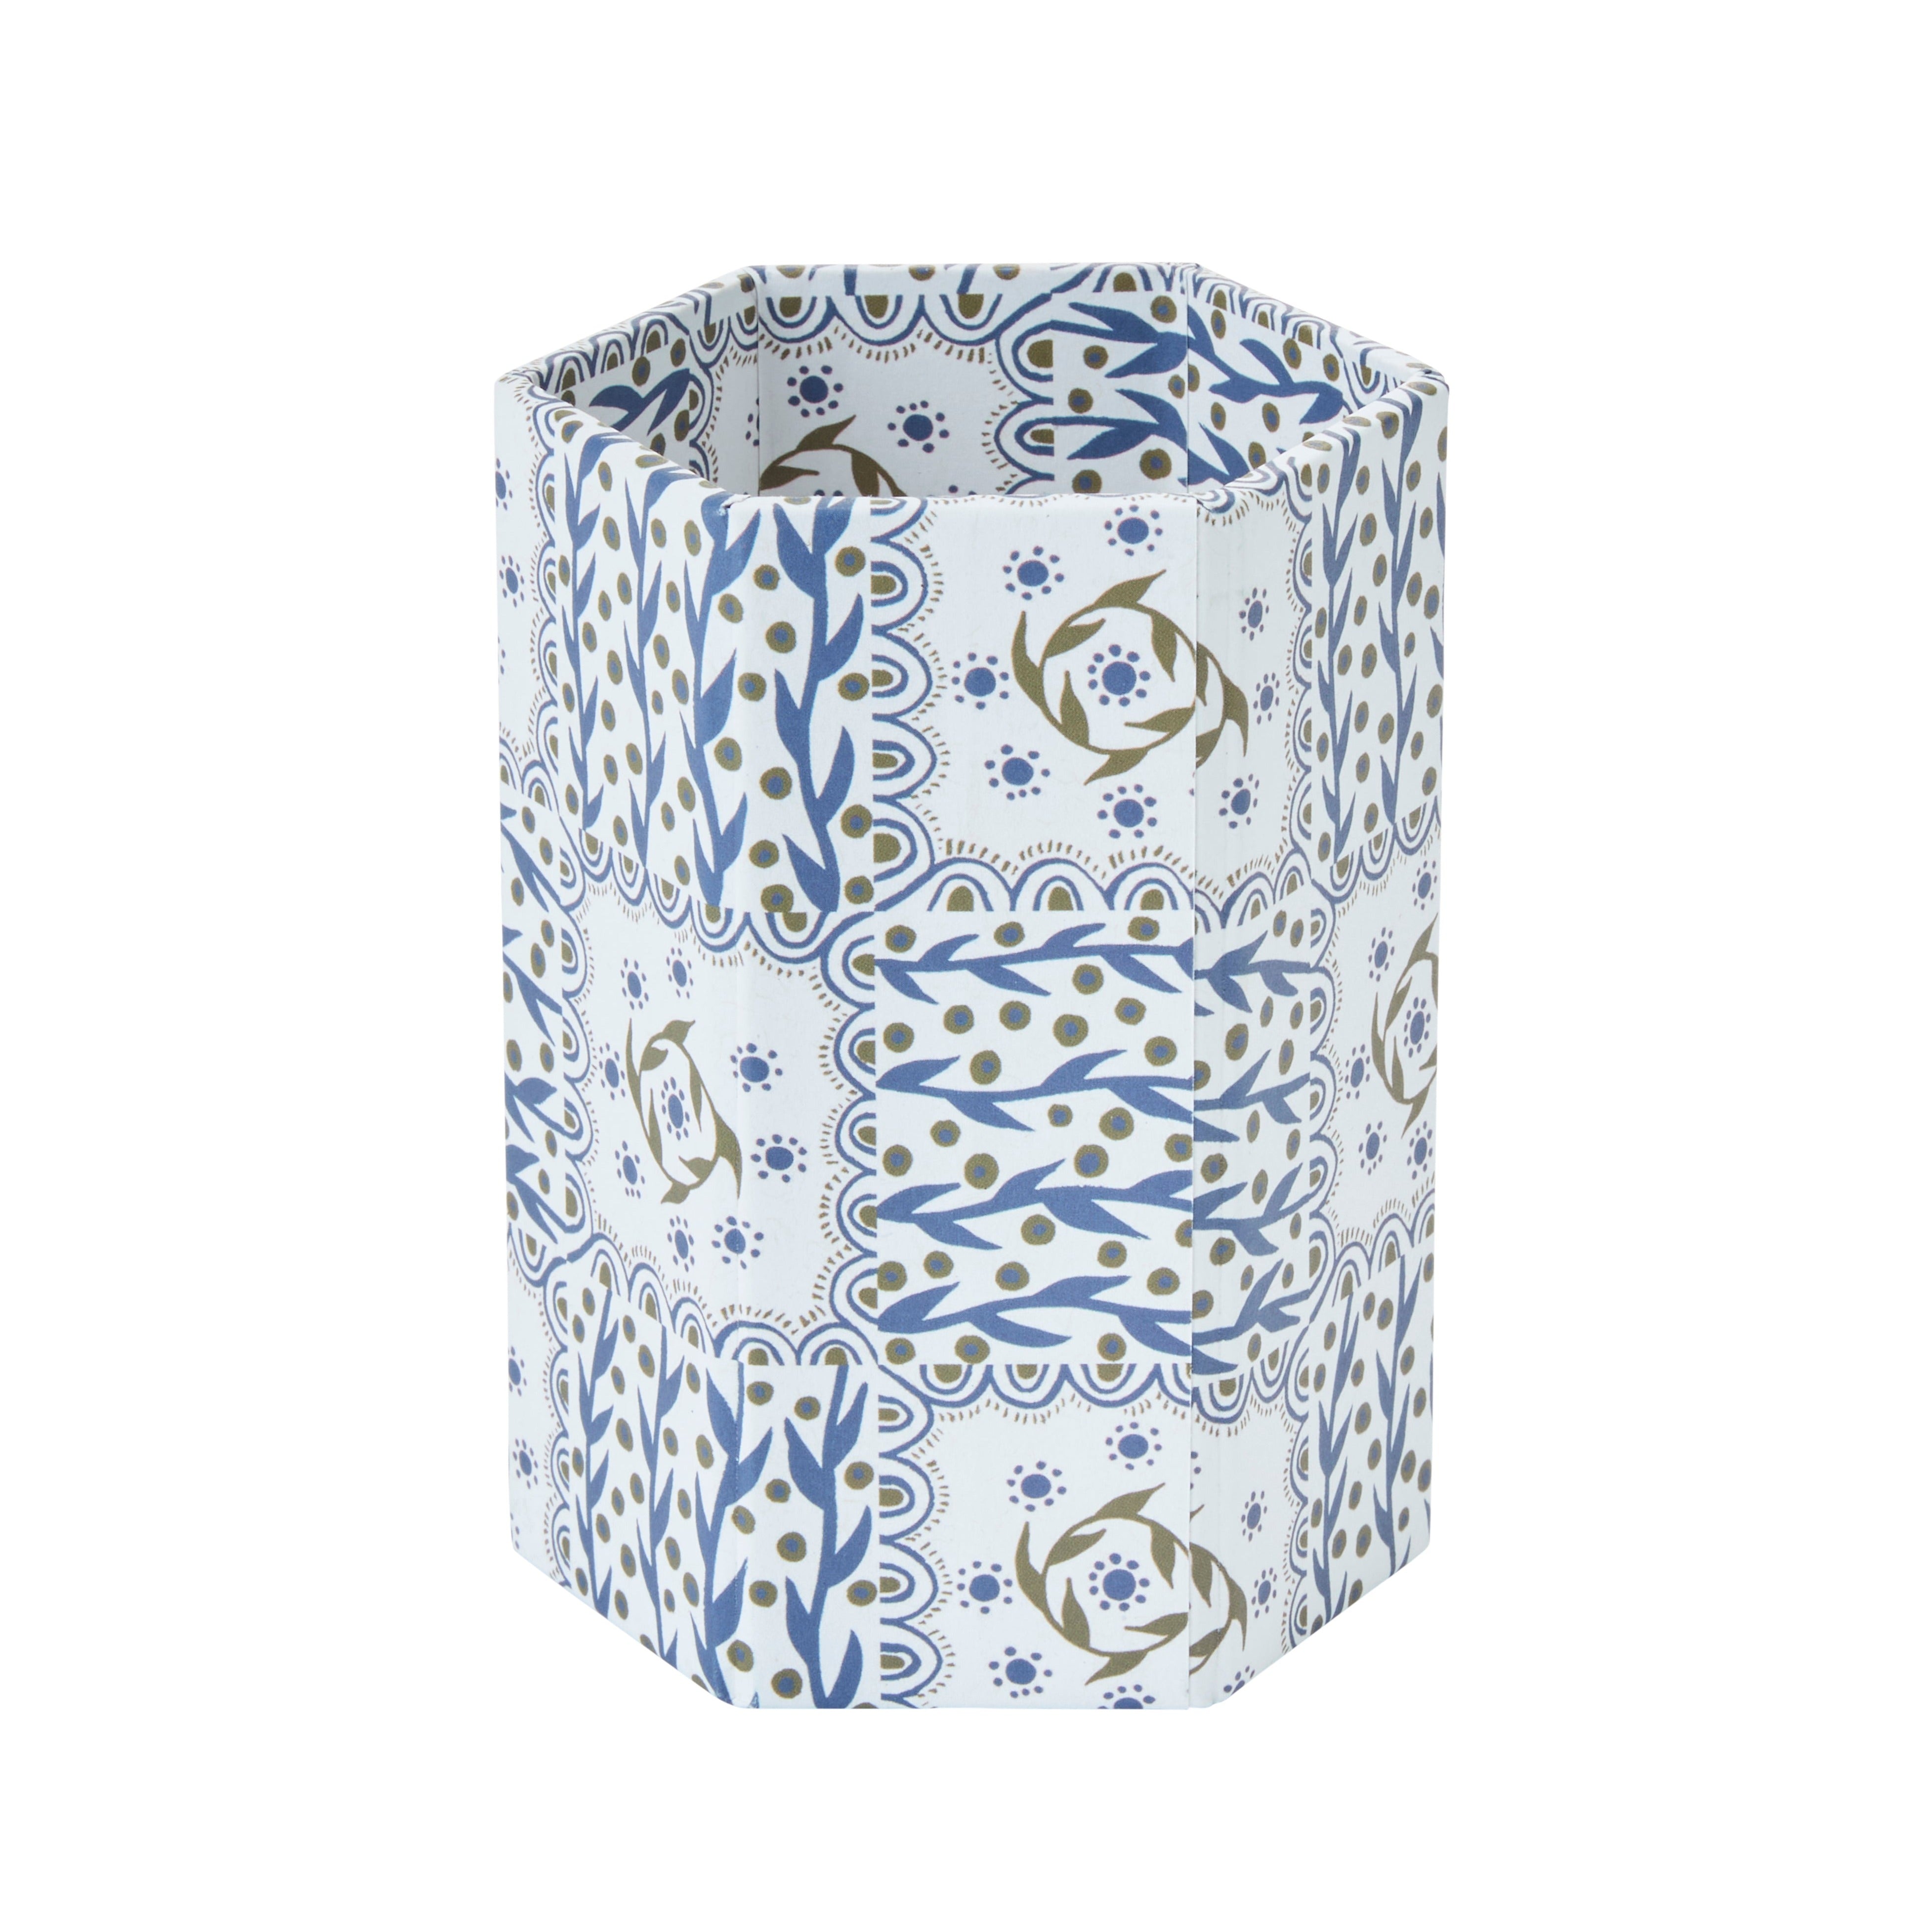 Nina Campbell Pen Pot in blue chequered pattern on white background